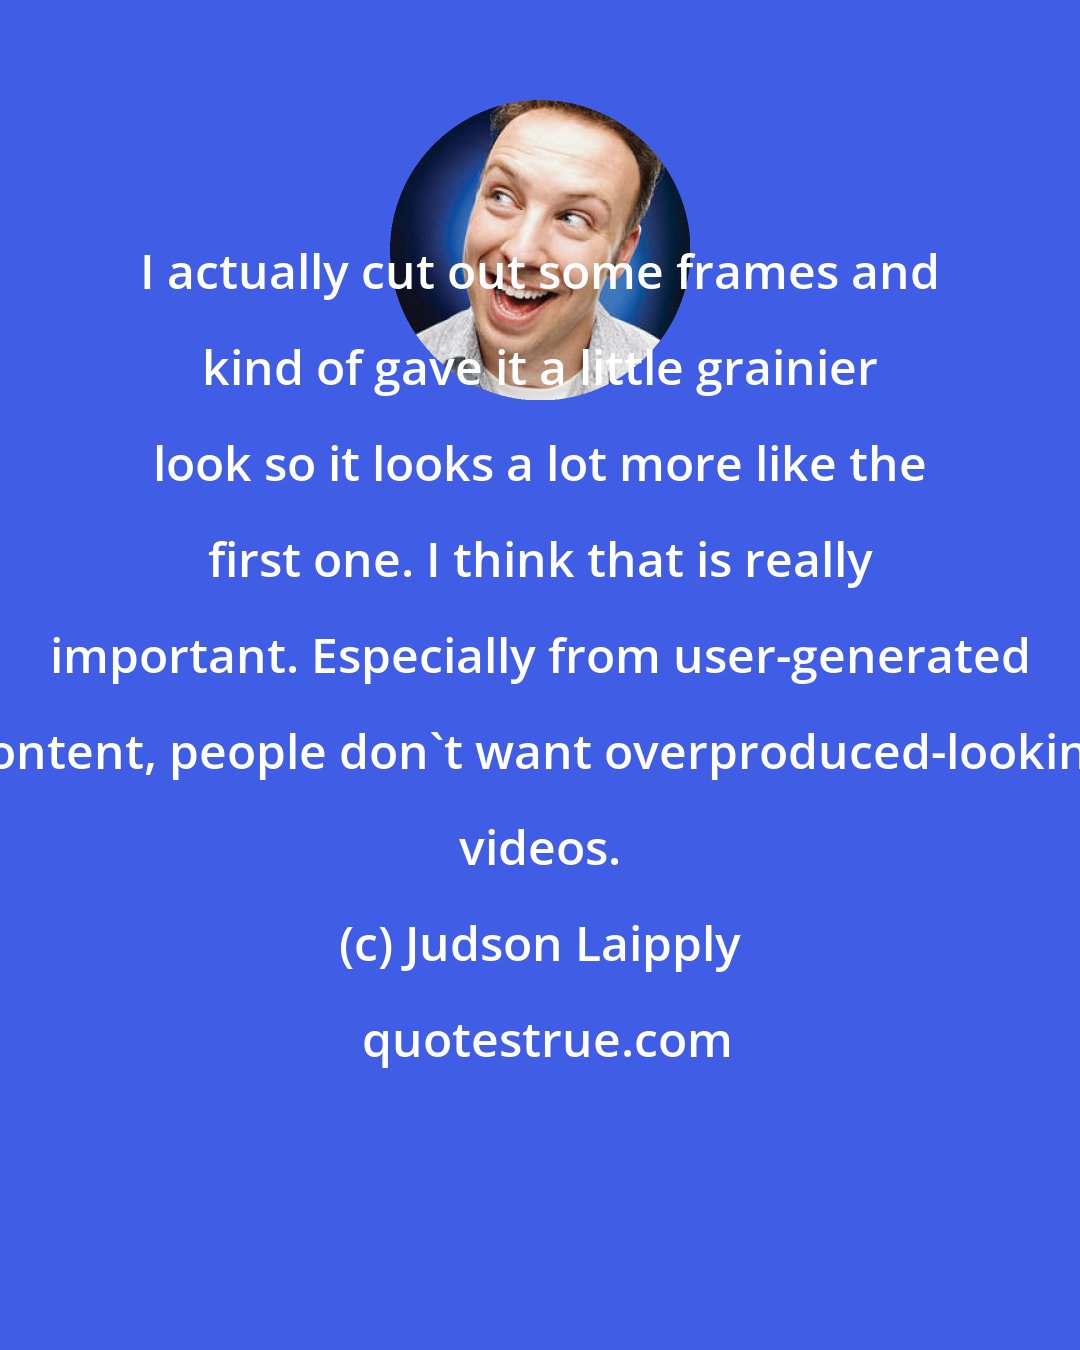 Judson Laipply: I actually cut out some frames and kind of gave it a little grainier look so it looks a lot more like the first one. I think that is really important. Especially from user-generated content, people don't want overproduced-looking videos.